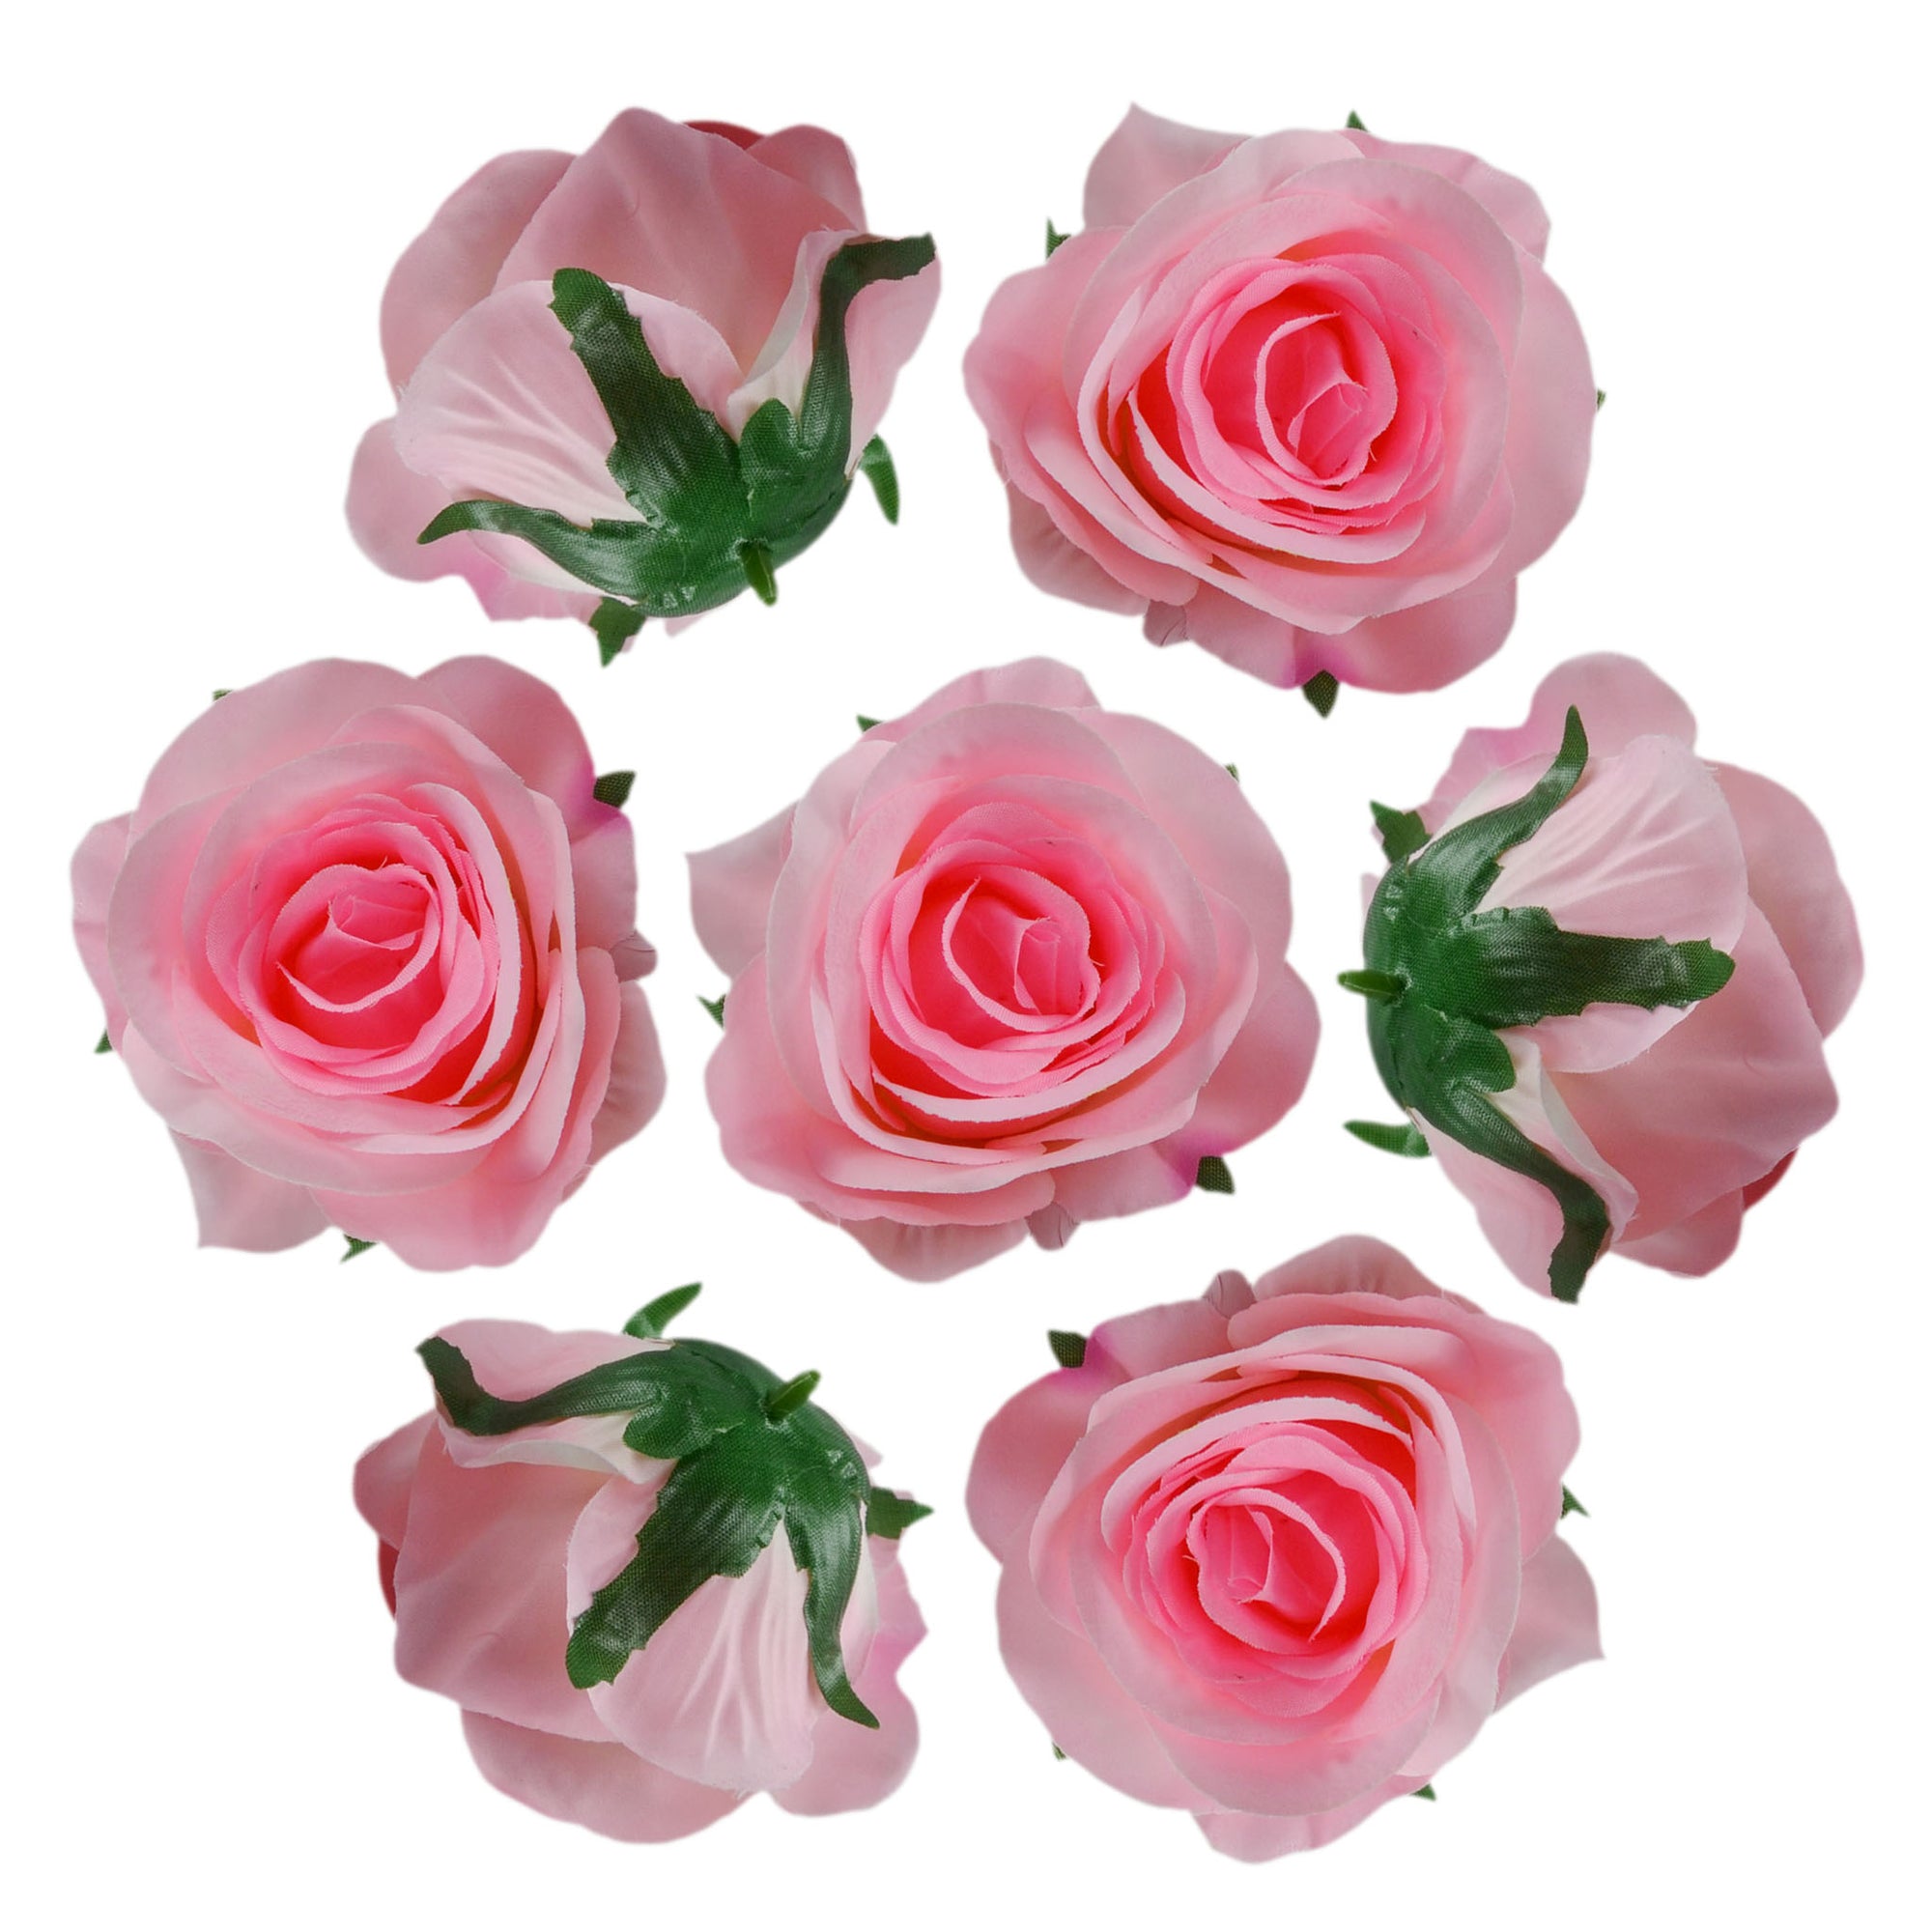 Silk Flowers Wholesale Roses Heads 3 inch 100pcs